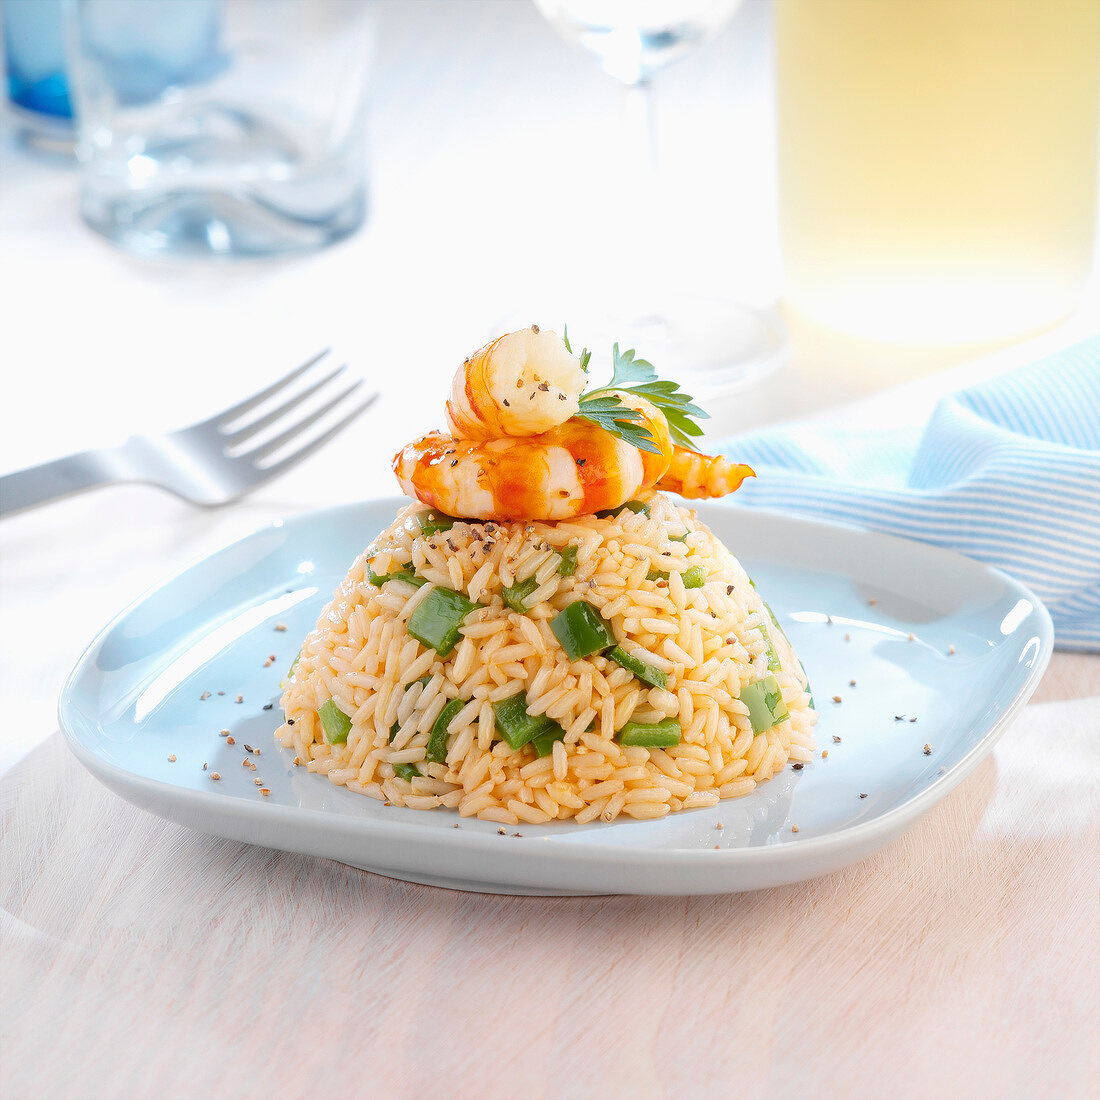 Cold rice and shrimp timbale